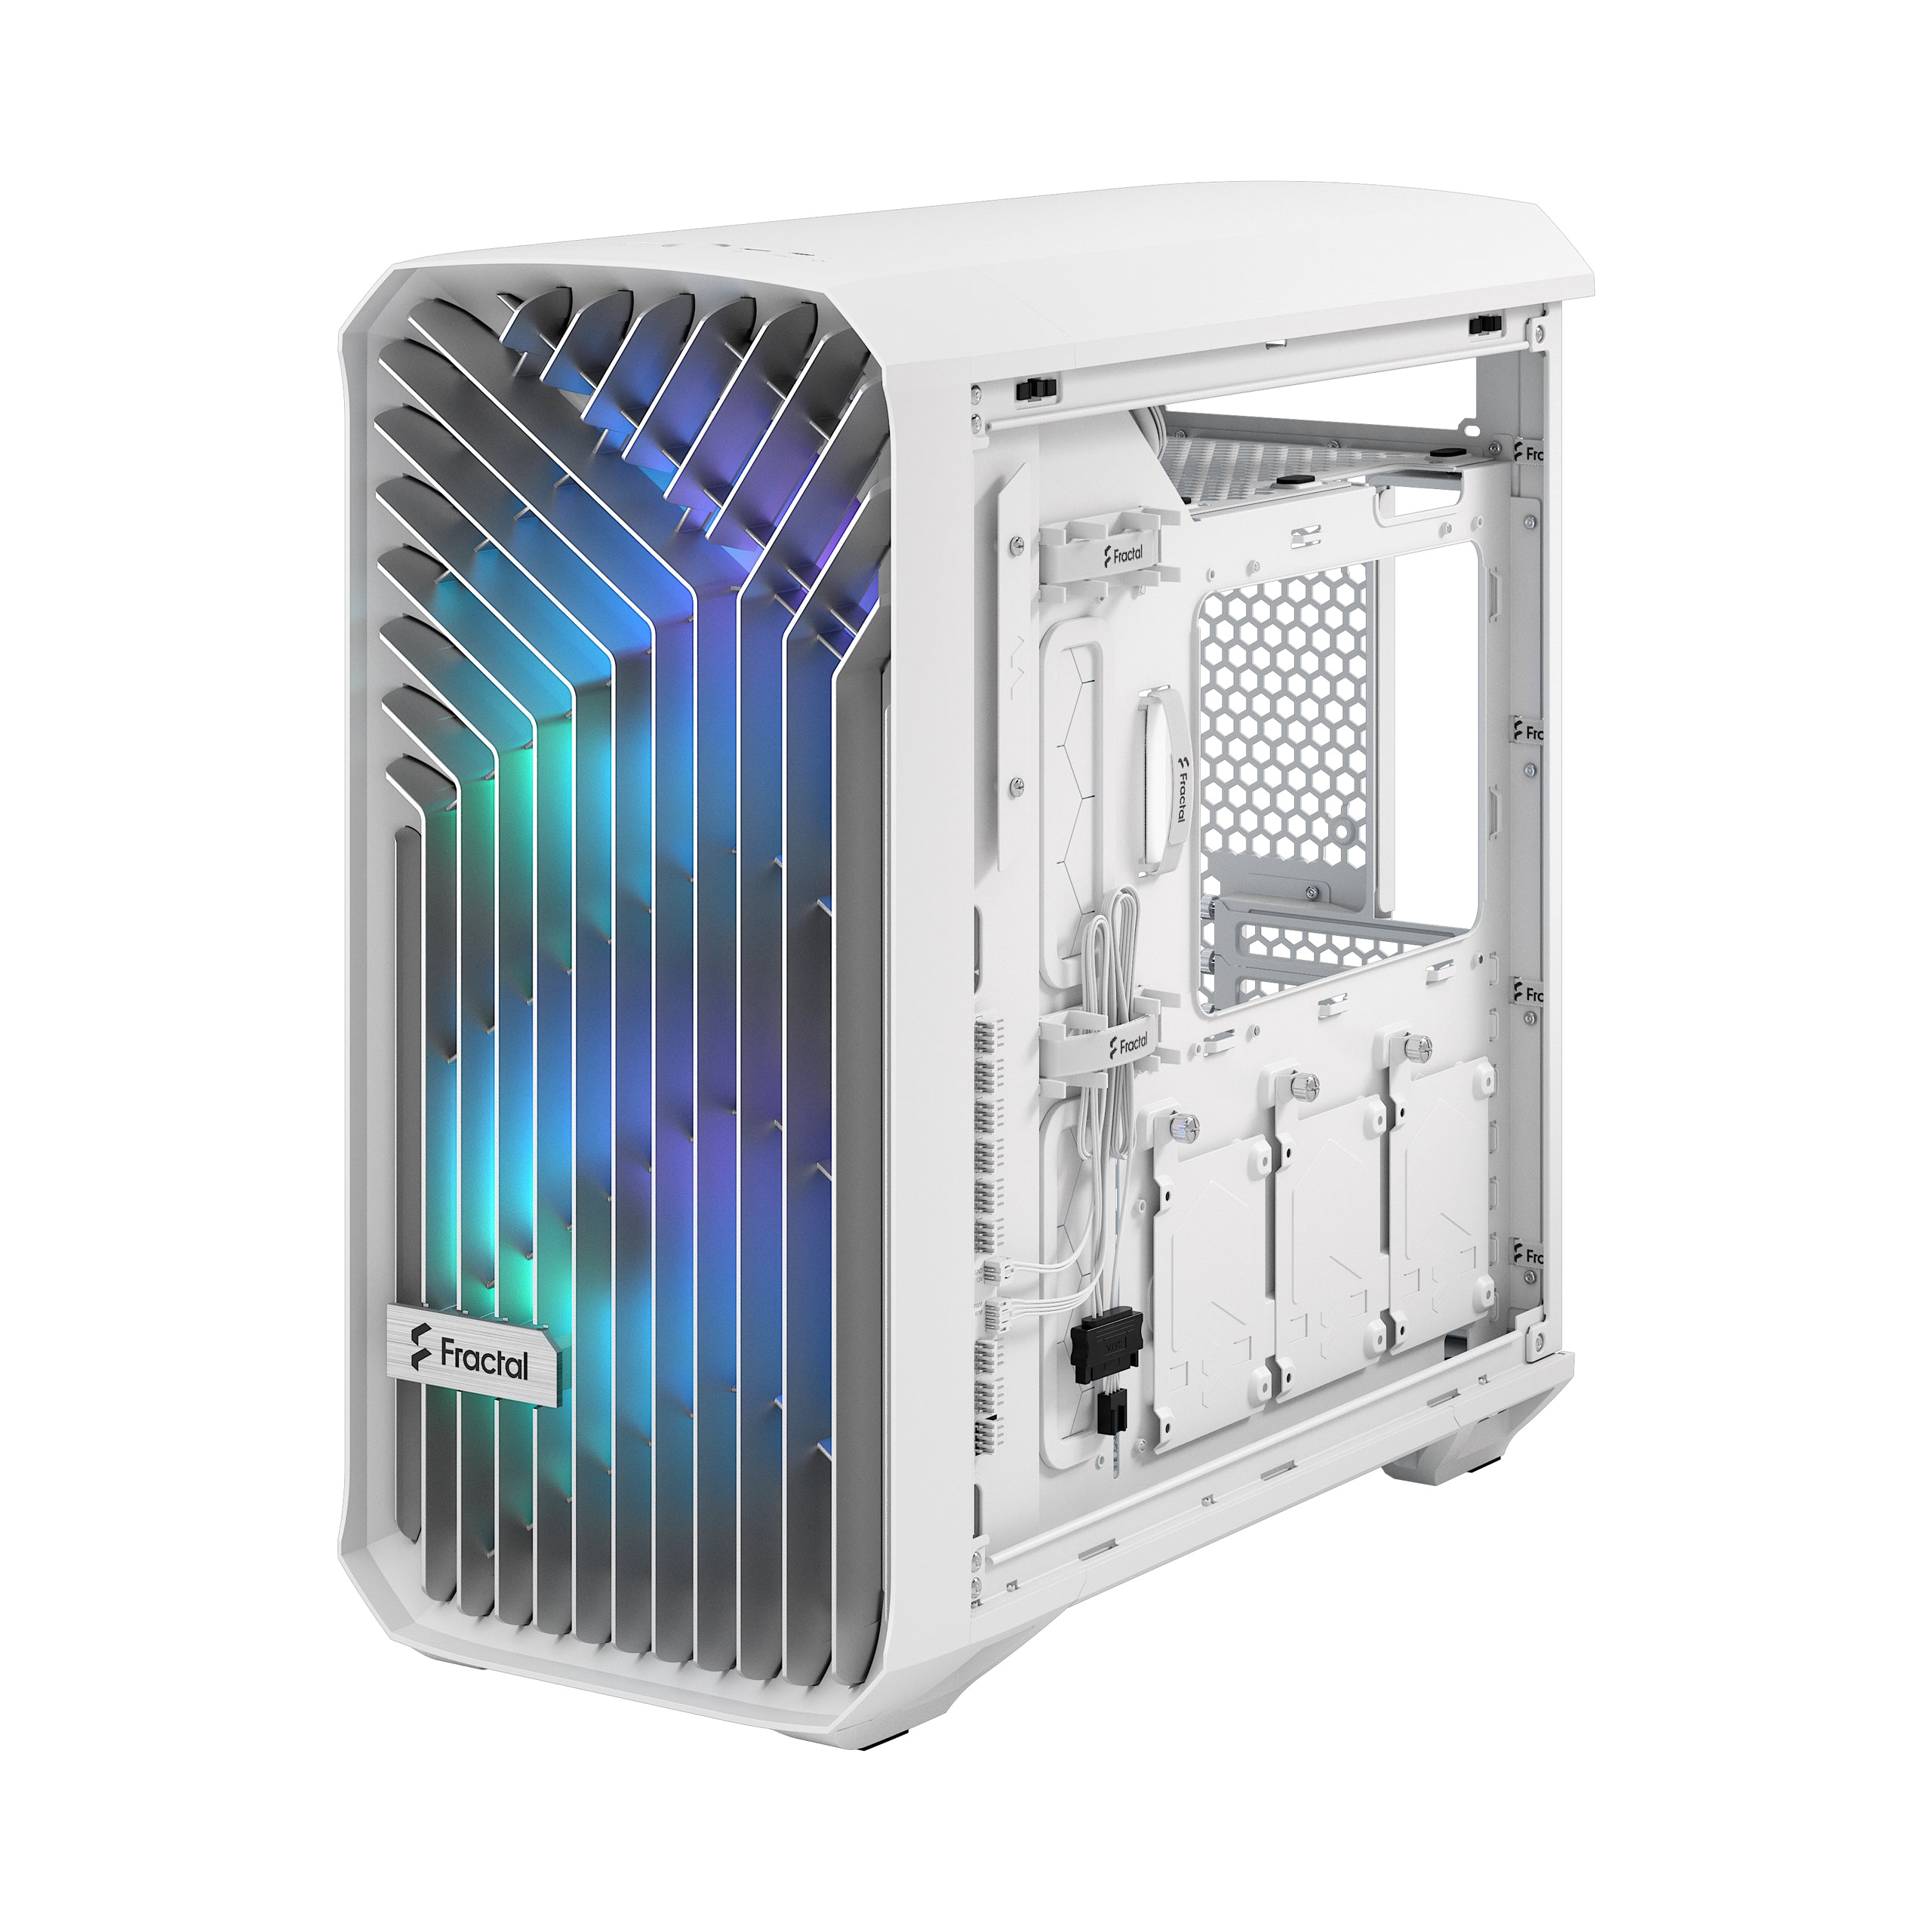 BOÎTIER FRACTAL MID TOWER TORRENT COMPACT RGB BLANC TAILLE TEINTE CLAIRE